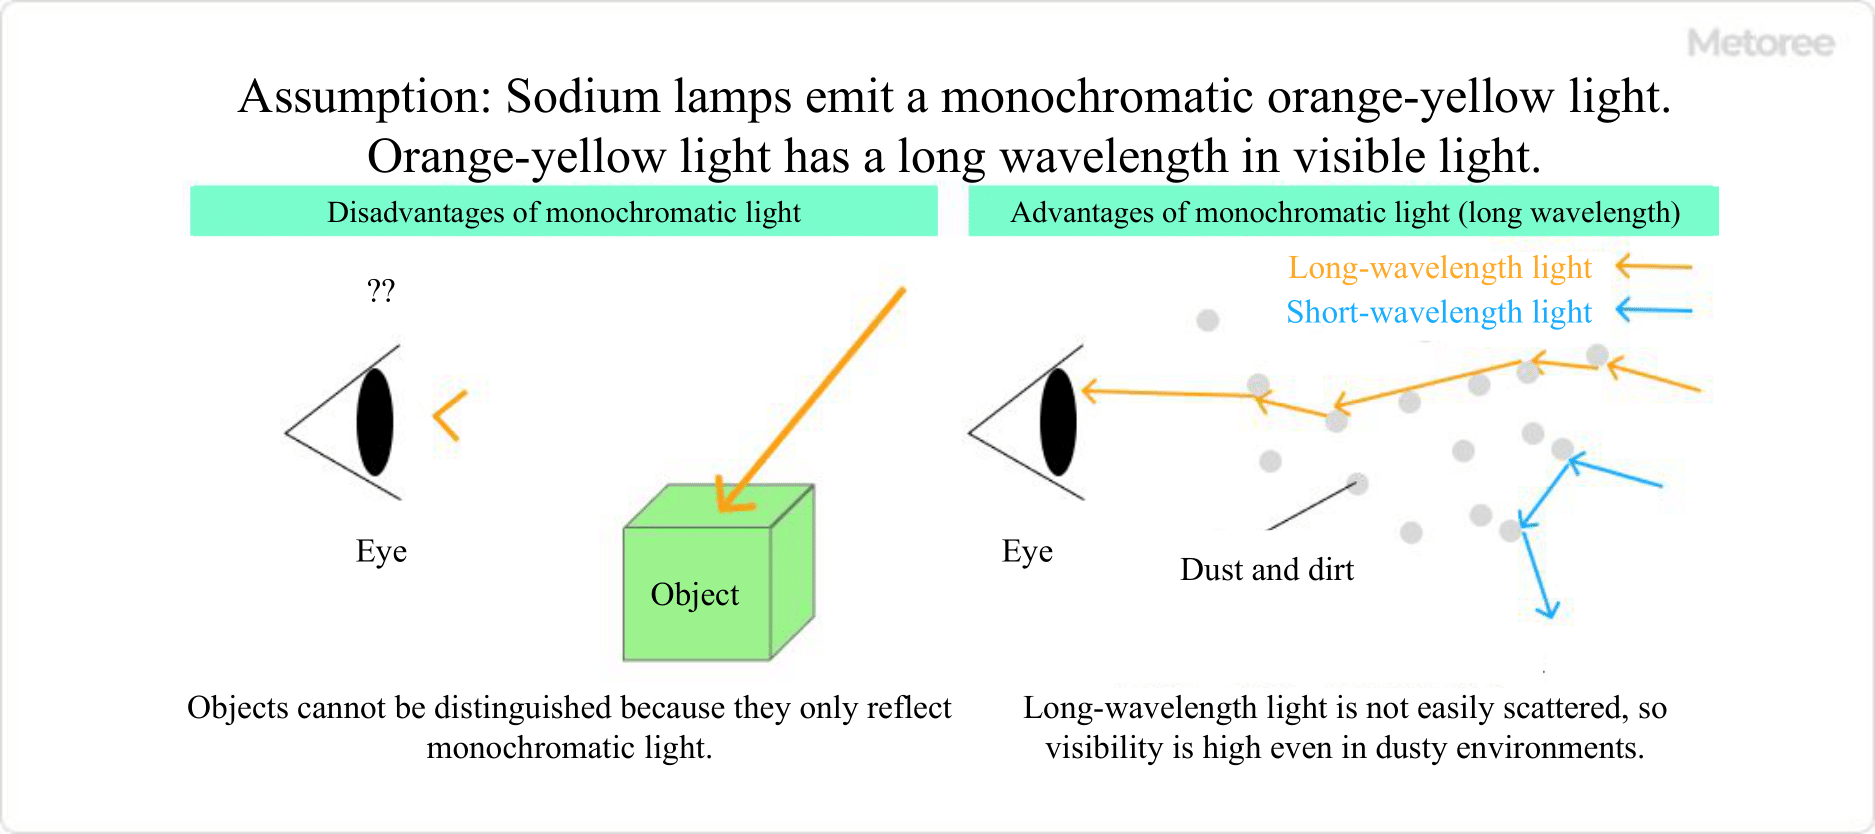 Figure 1. Sodium lamps and visibility